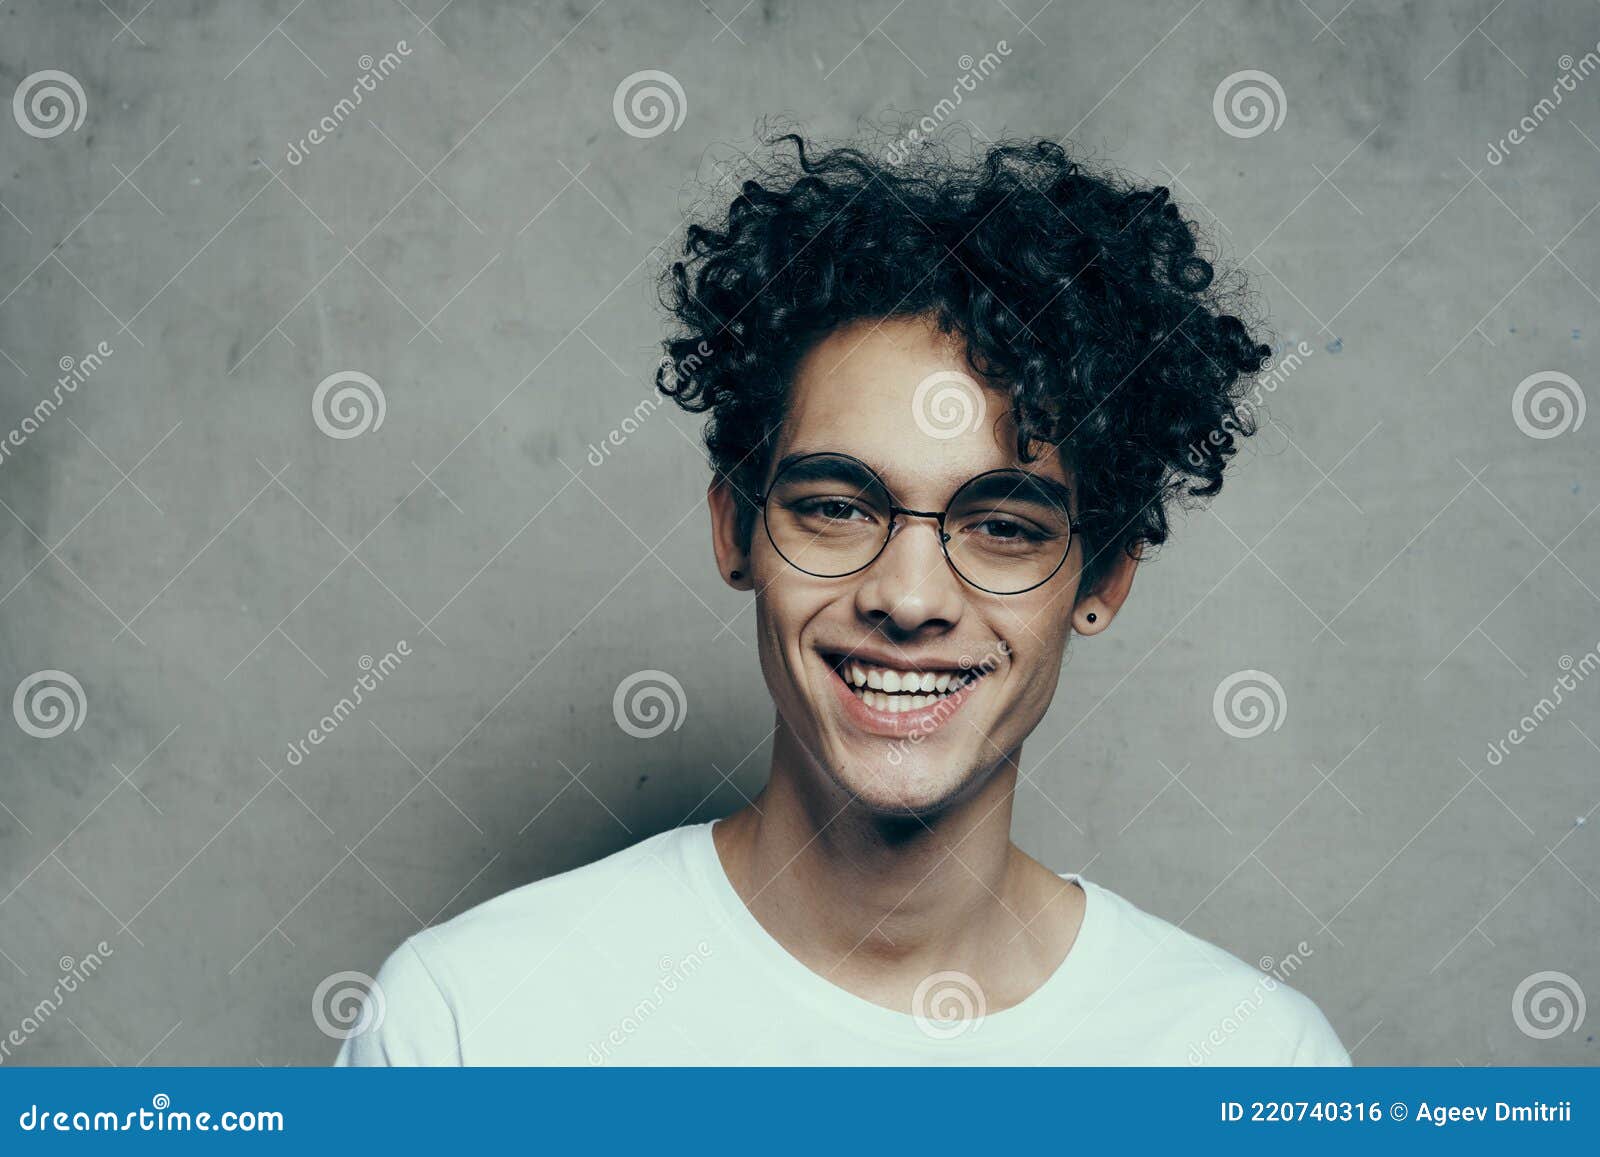 Funny Curly-haired Guy Gesturing with His Hand Wearing Glasses Emotions  Cropped View Stock Photo - Image of modern, curly: 220740316